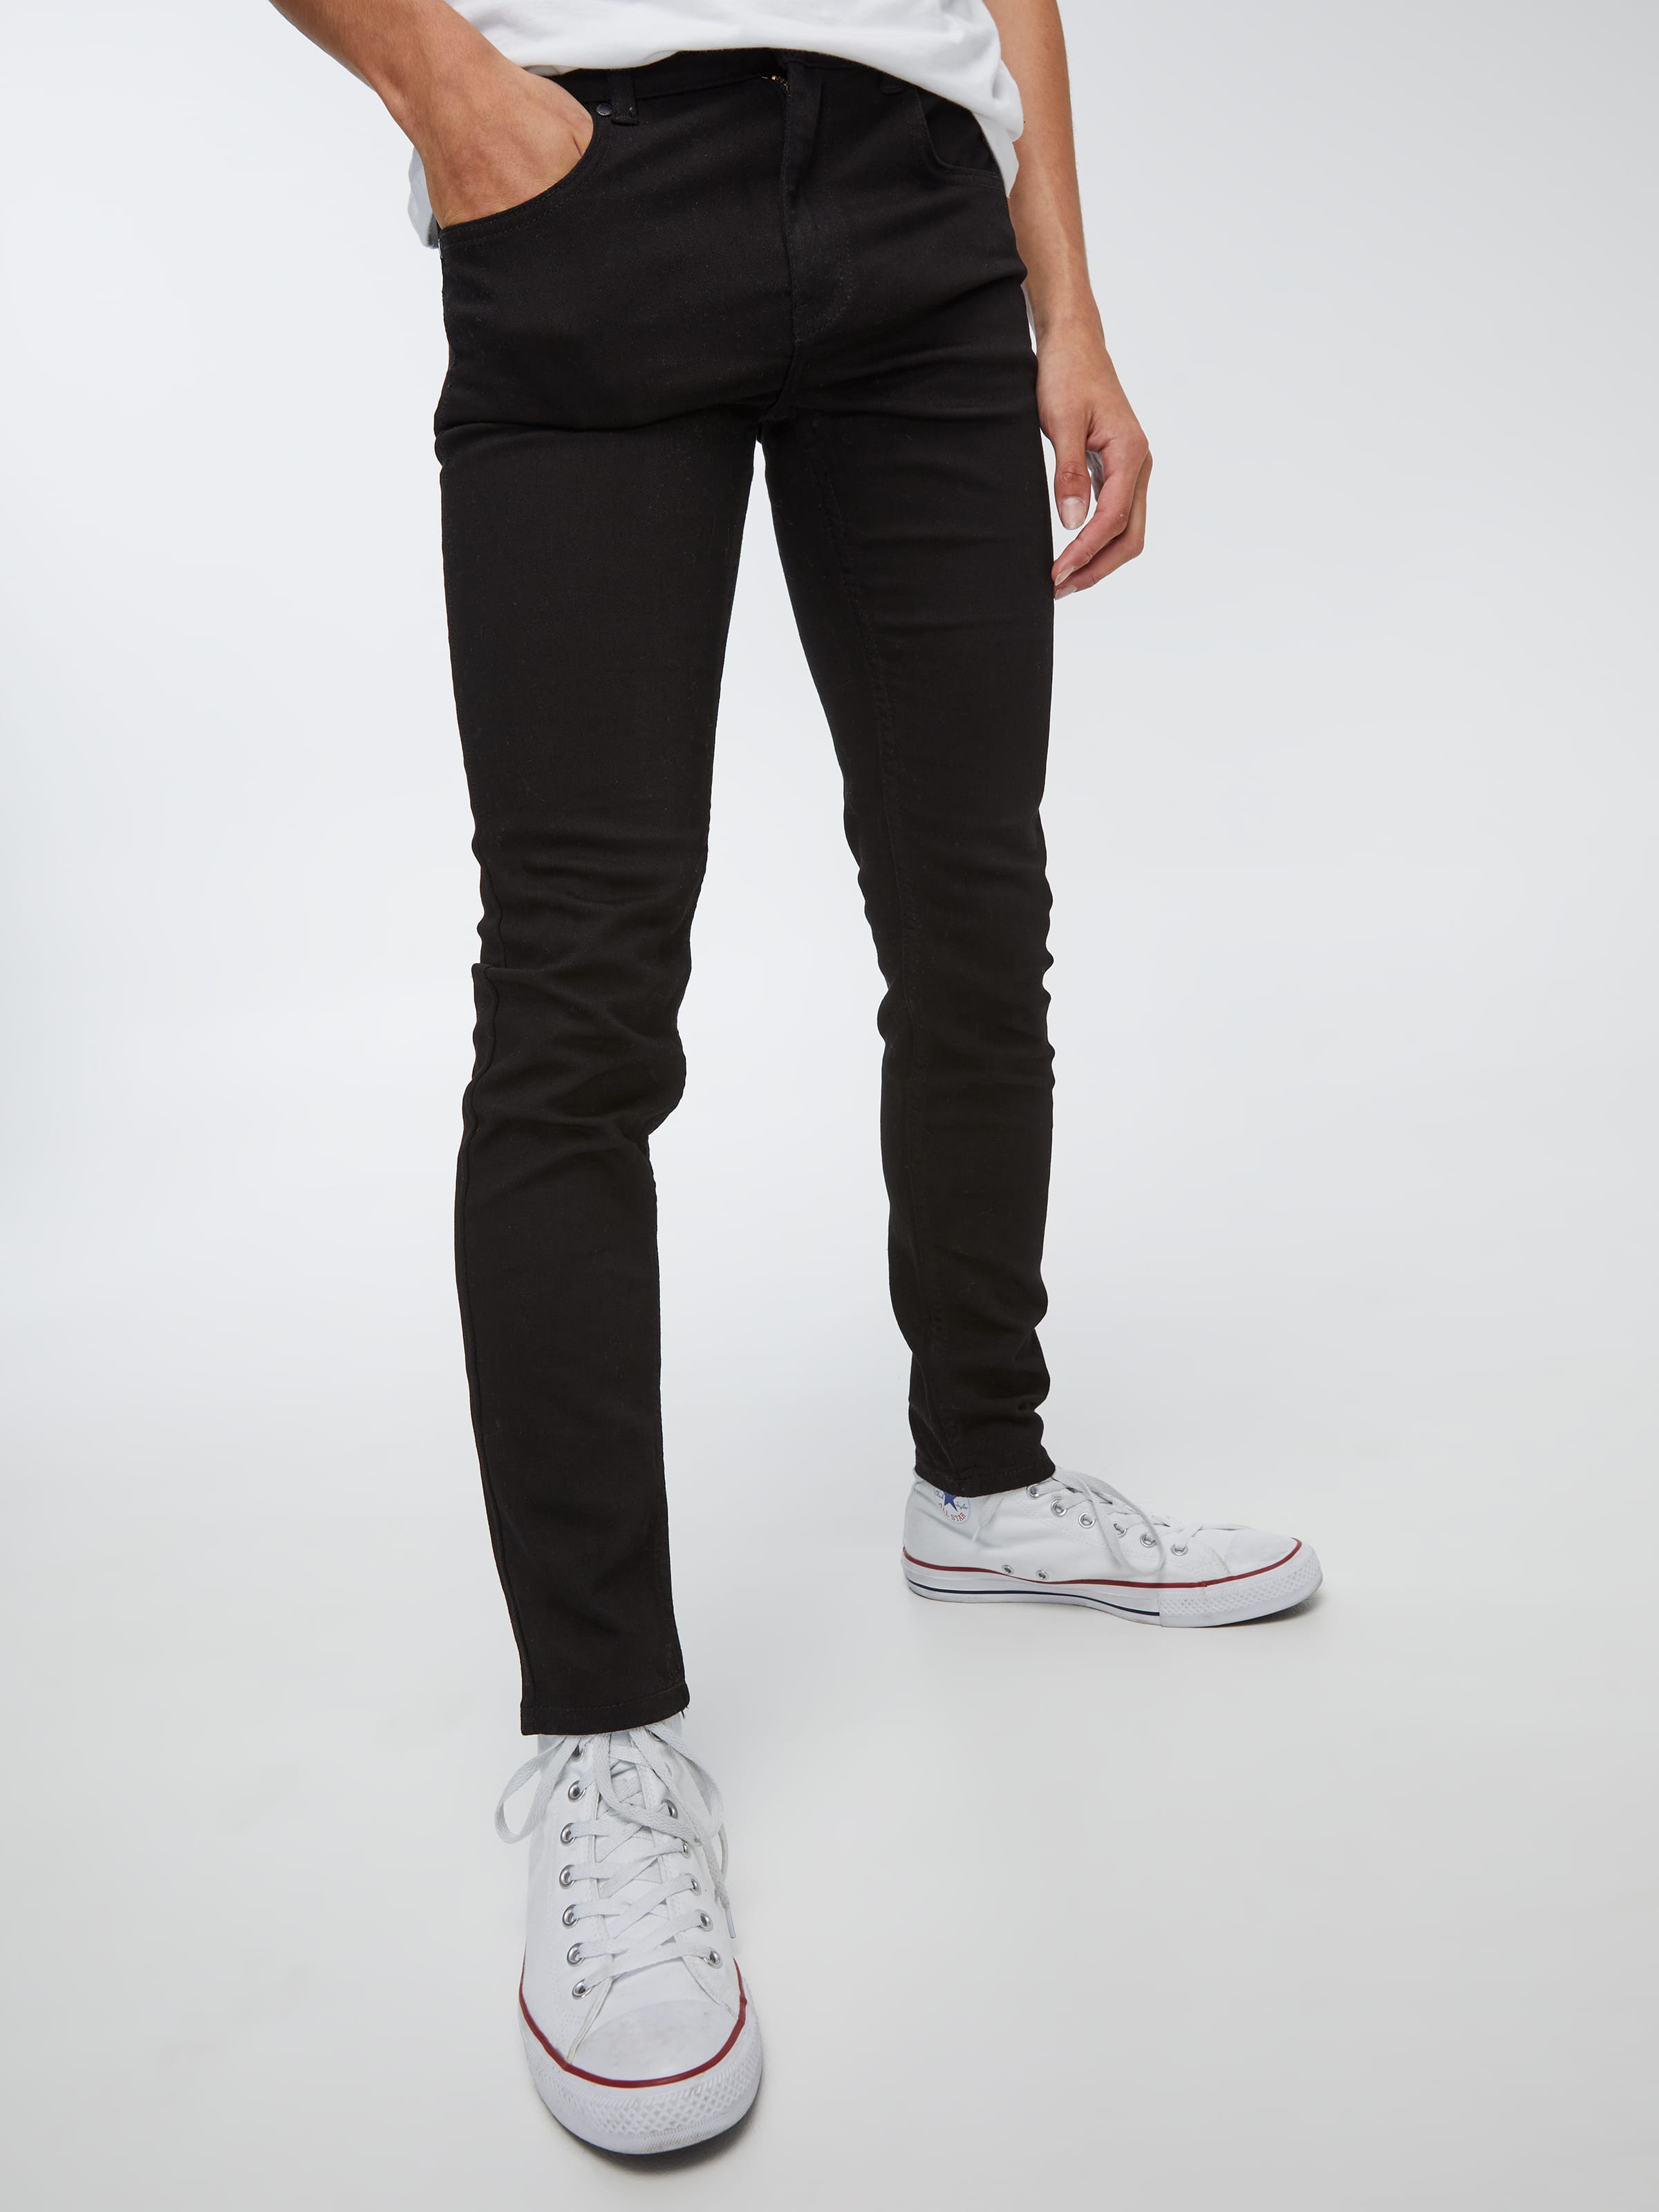 Boys Power Stretch Super Skinny Jeans - Just Jeans Online